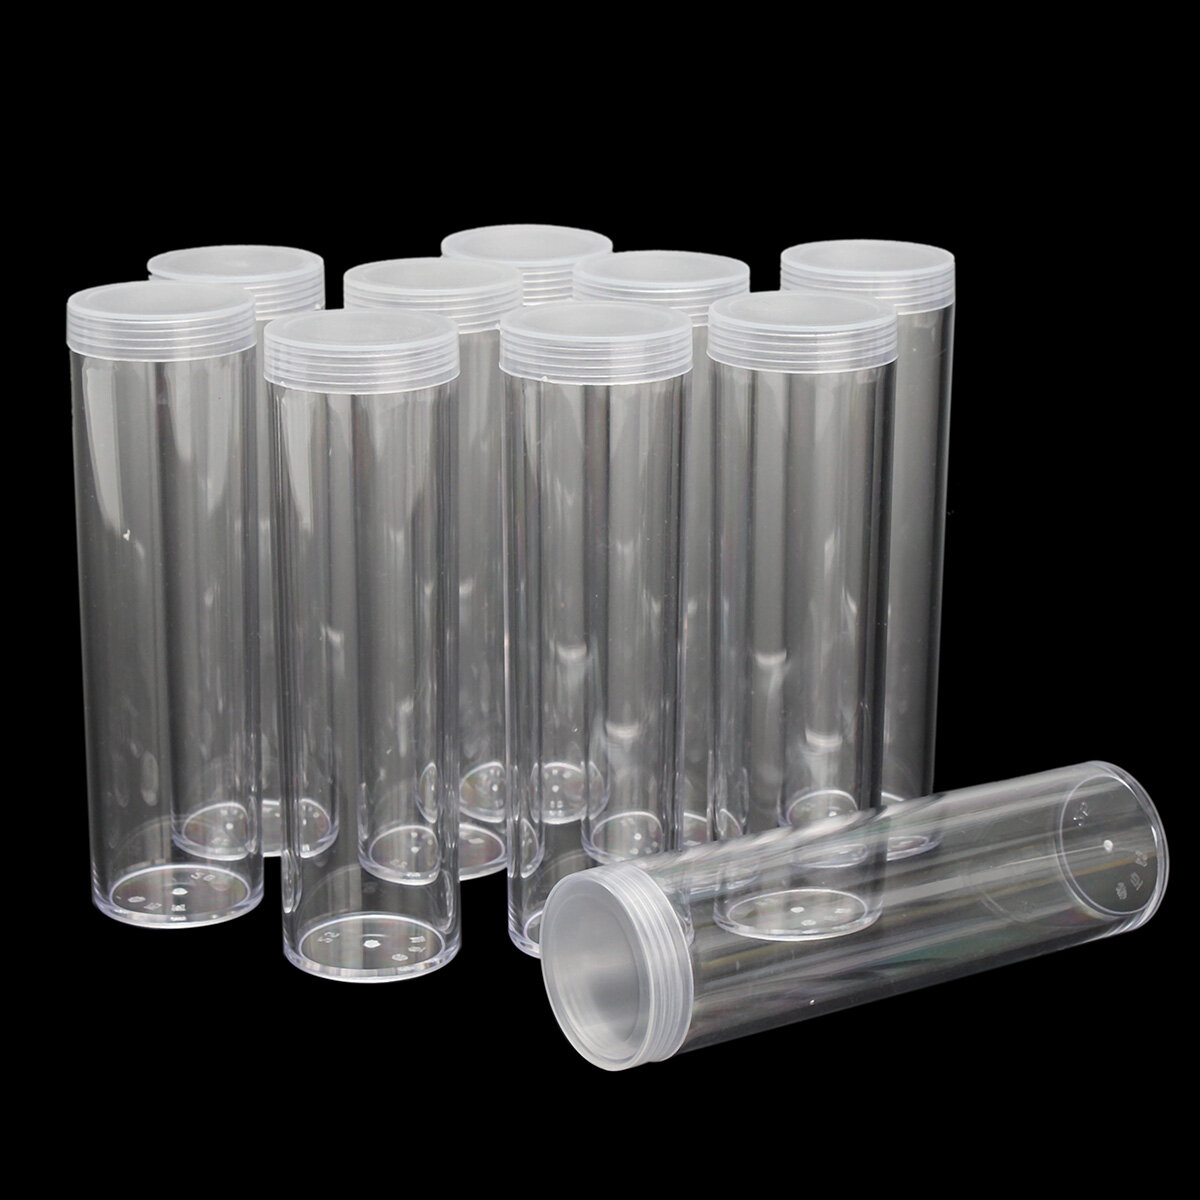 10 Stks / set 25mm Ronde Clear Plastic Coin Tube Munt Houder Container voor Kwart Dollar Opslag Buis